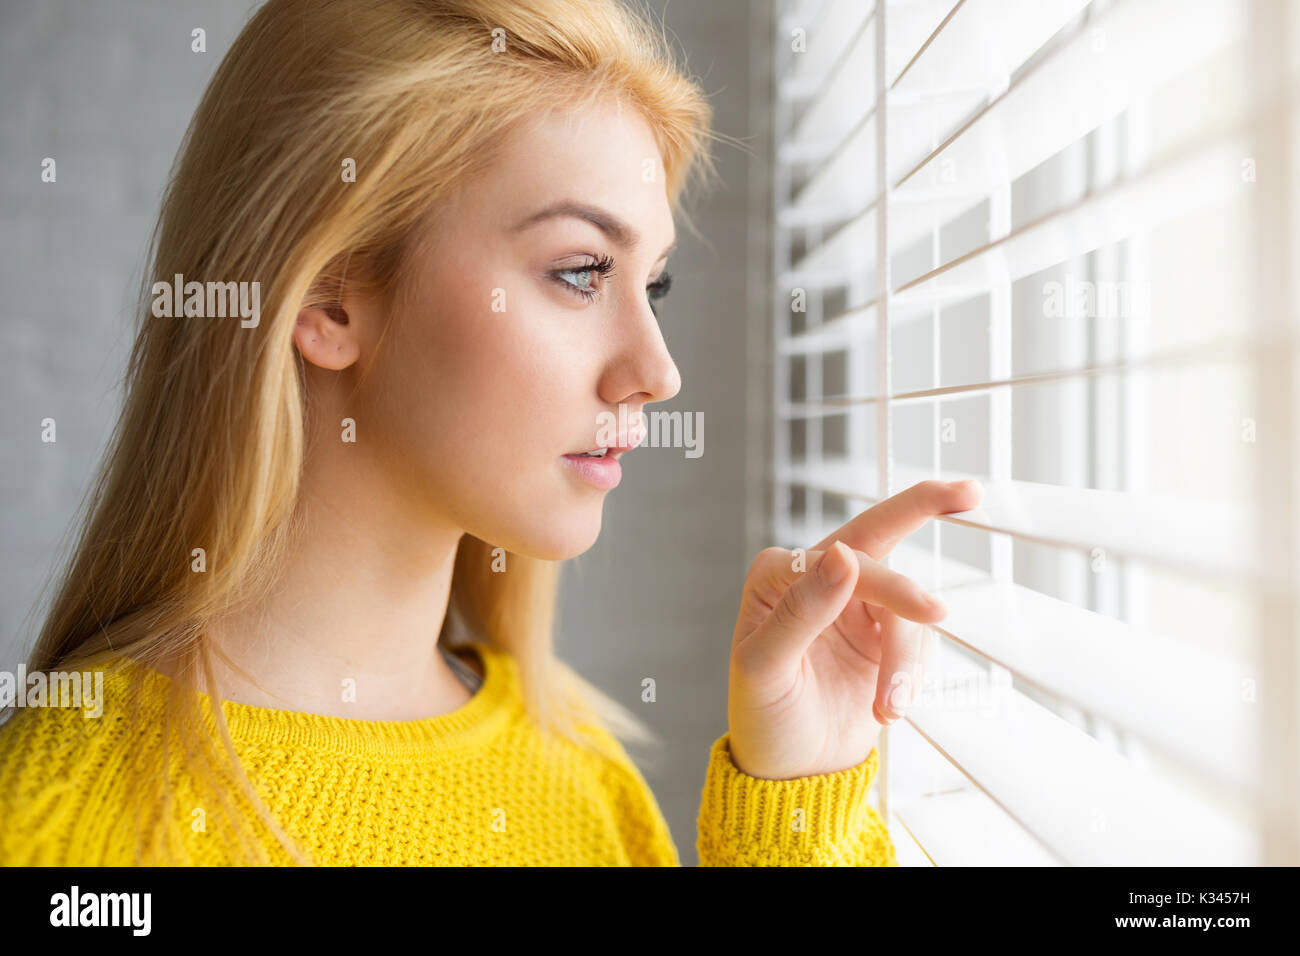 A photo of young, beautiful woman standing by the window and looking outside. She's waiting. Stock Photo